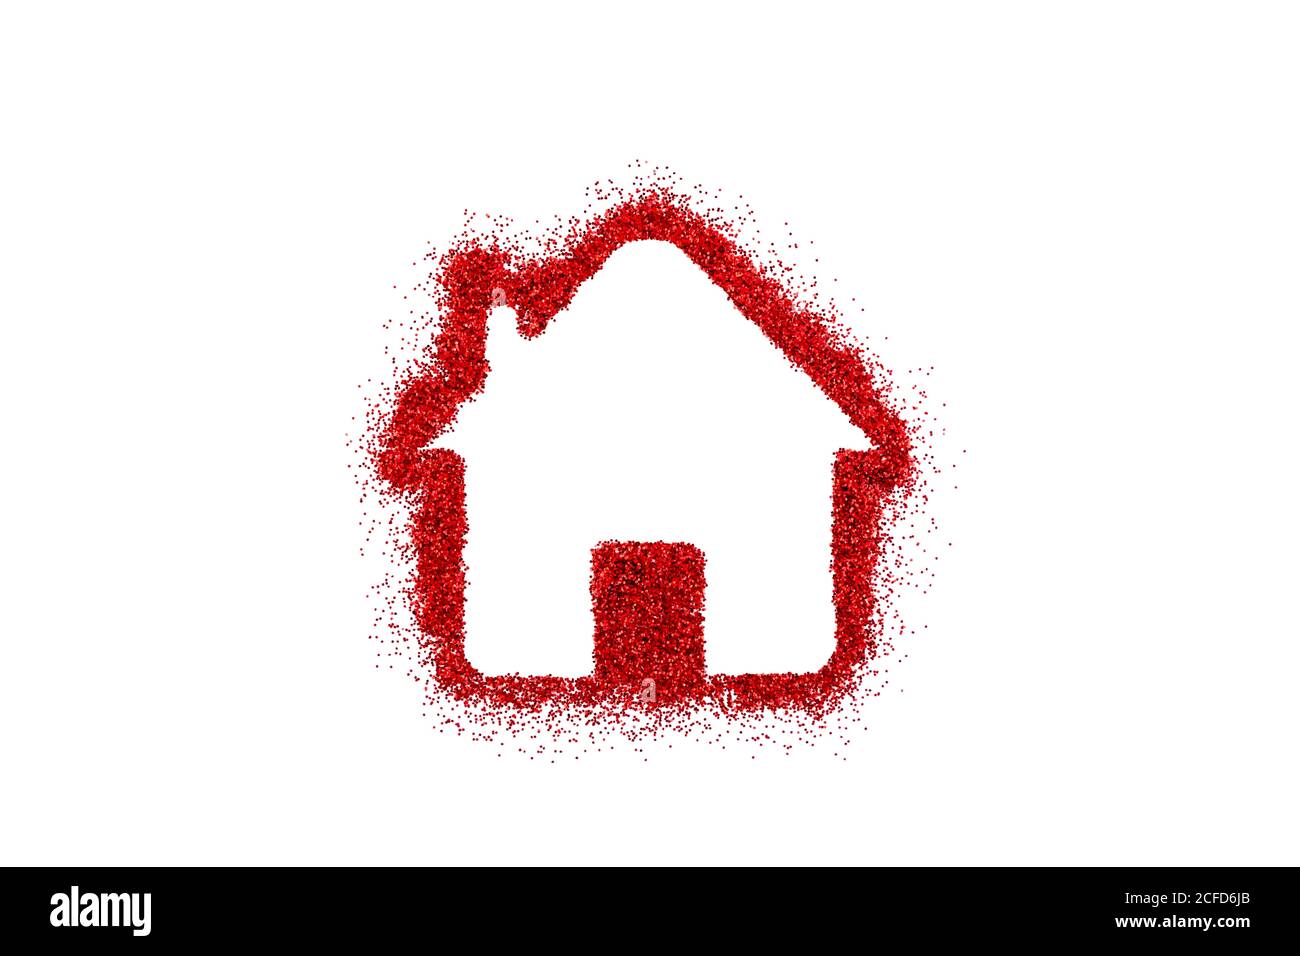 Small house shape on red glitter isolated on white background Stock Photo